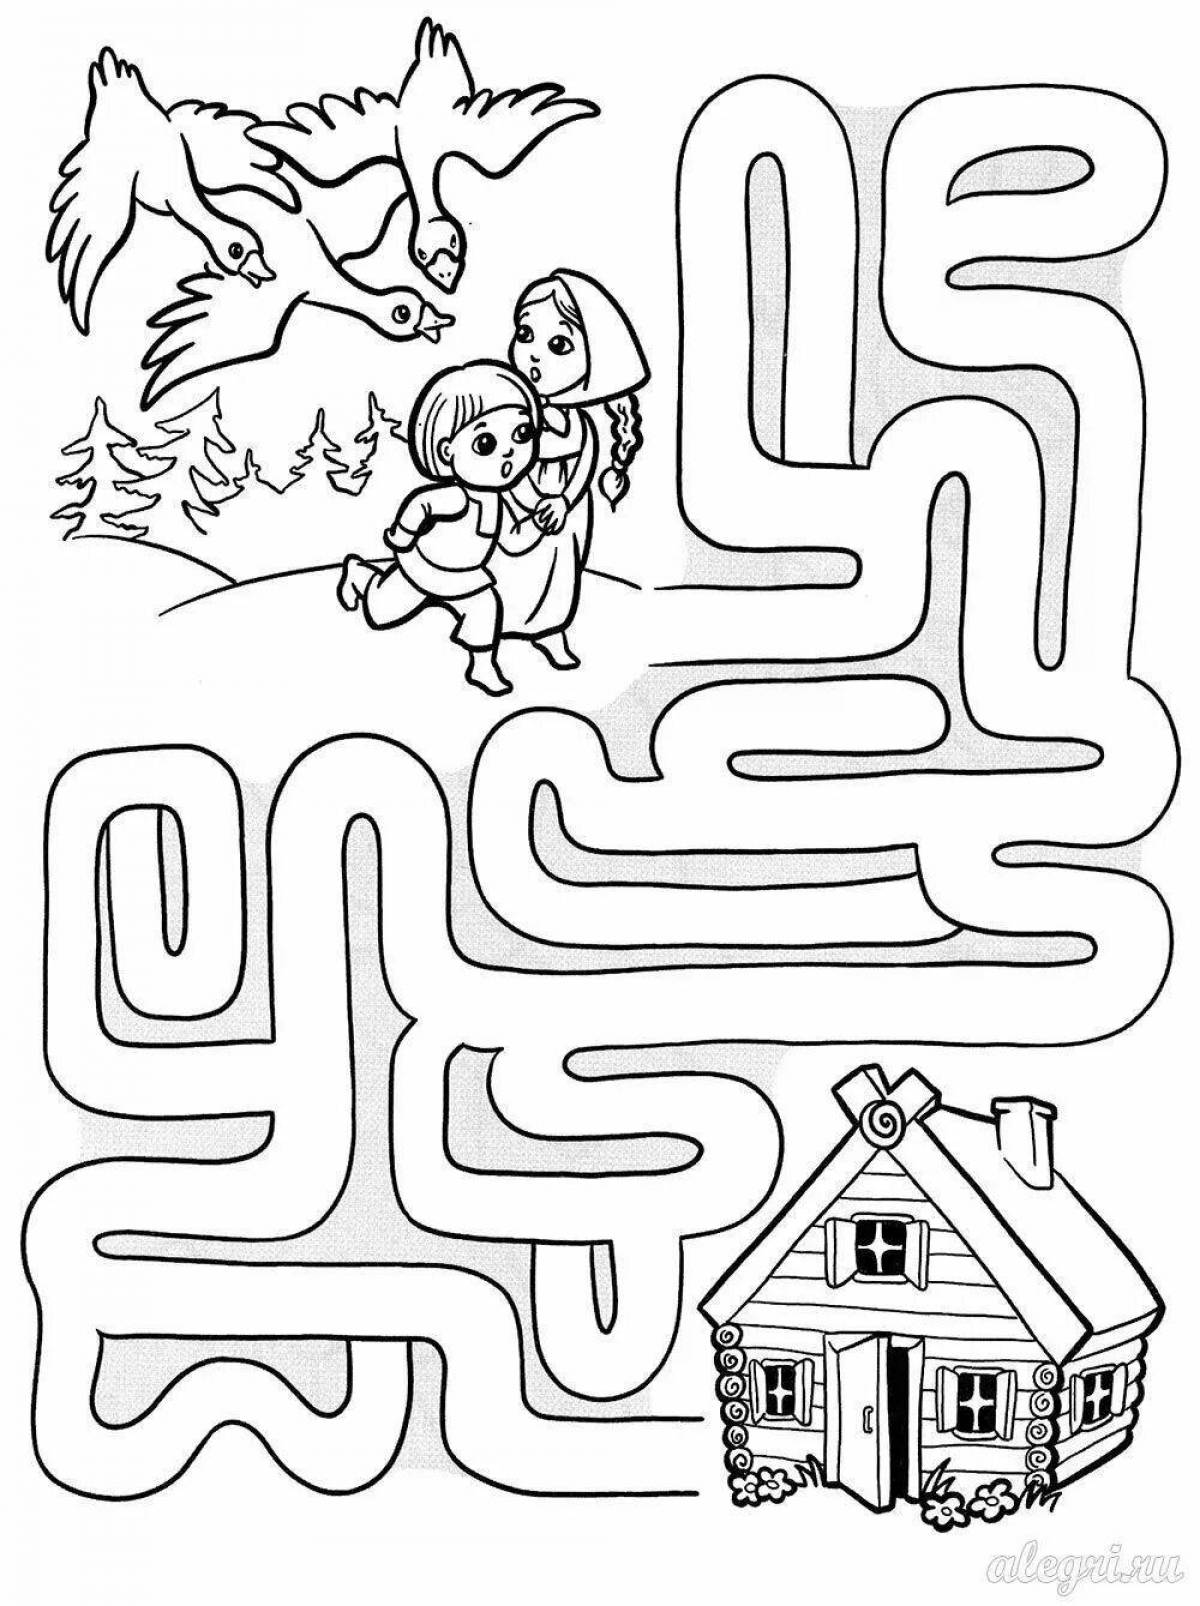 Charming maze coloring book for kids